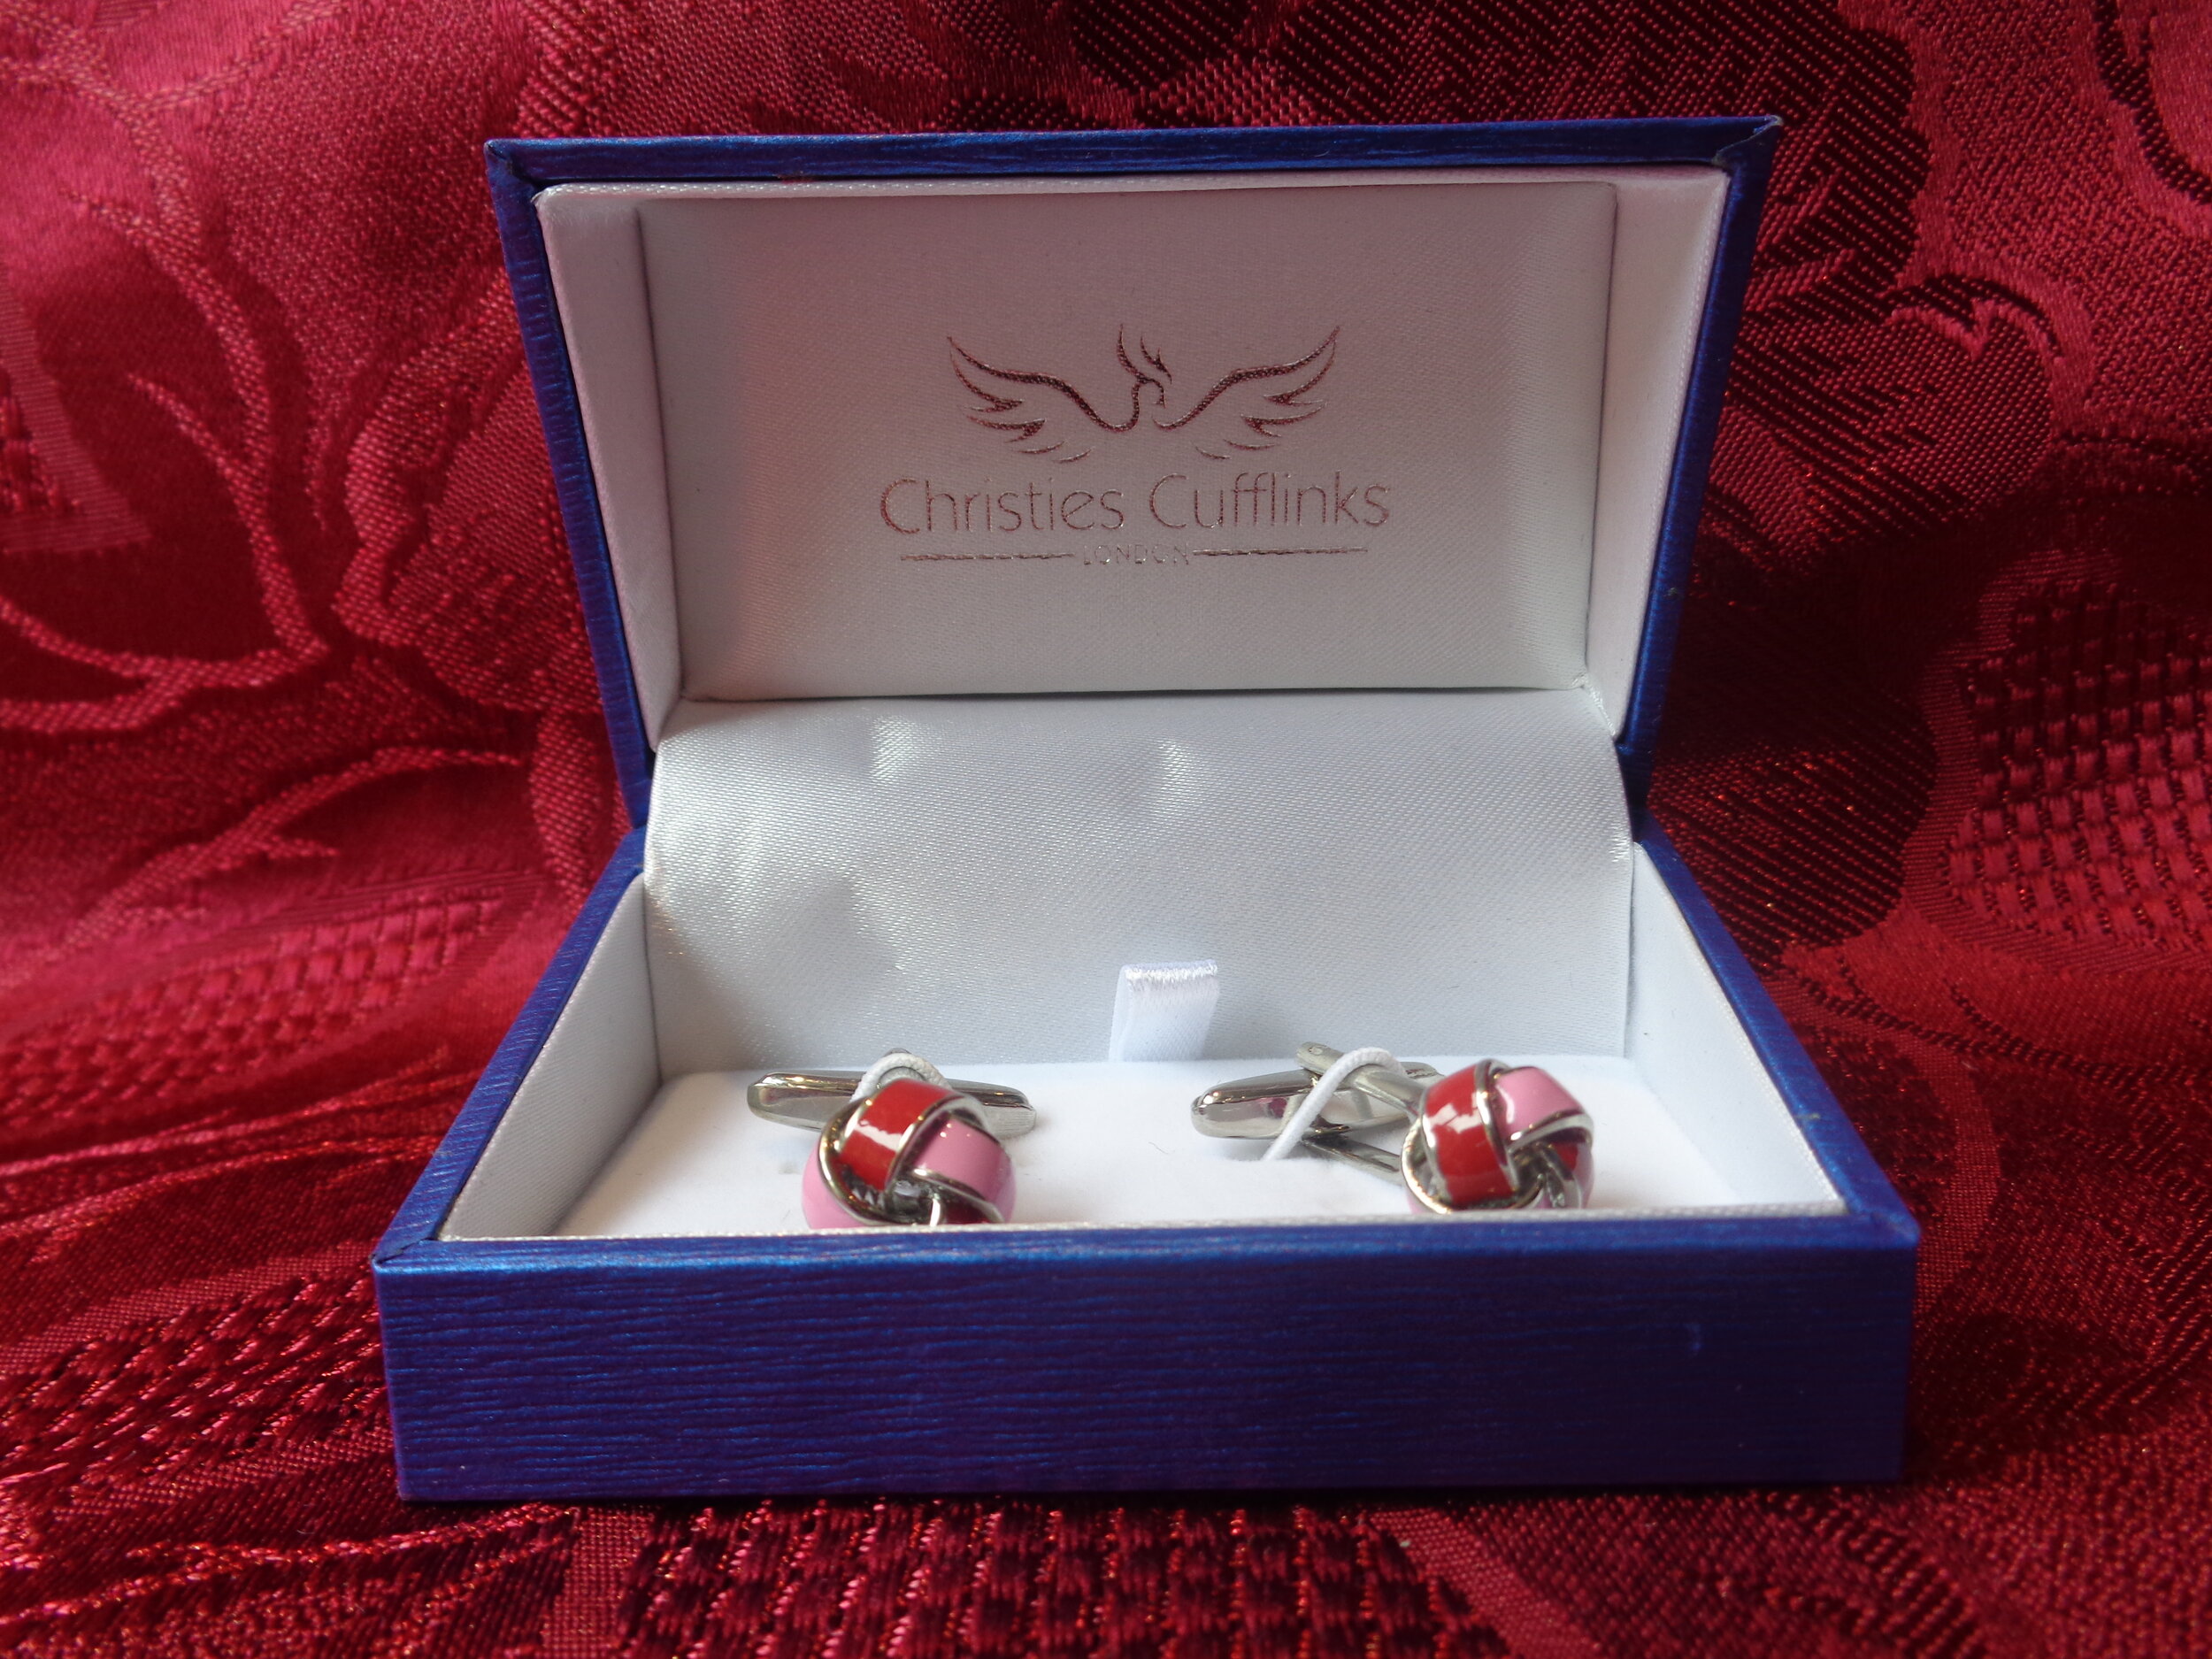 Christies Cricket Bat and Ball Cufflinks New and Boxed 